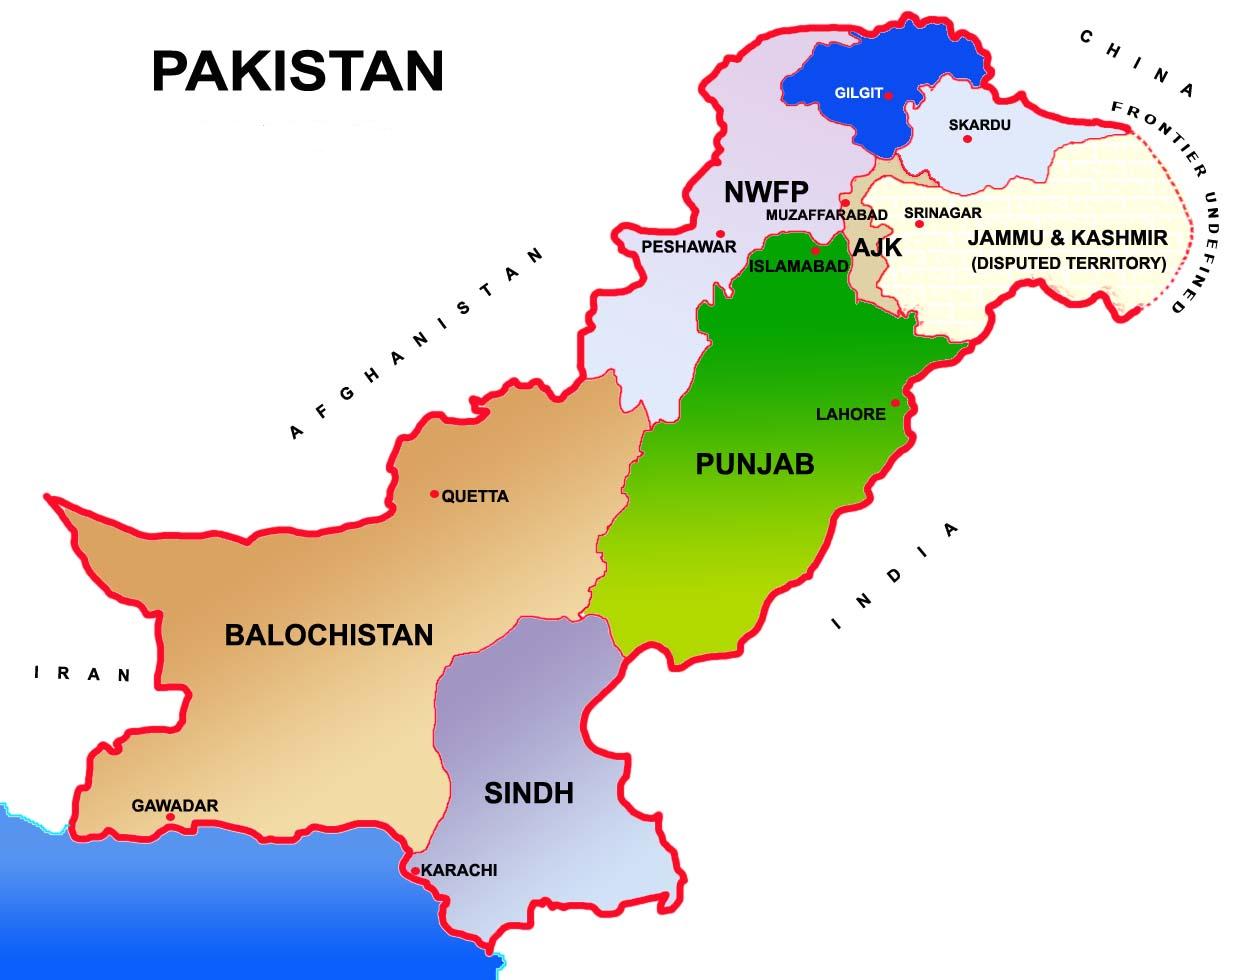 Pakistan Map With States - HD Wallpaper 